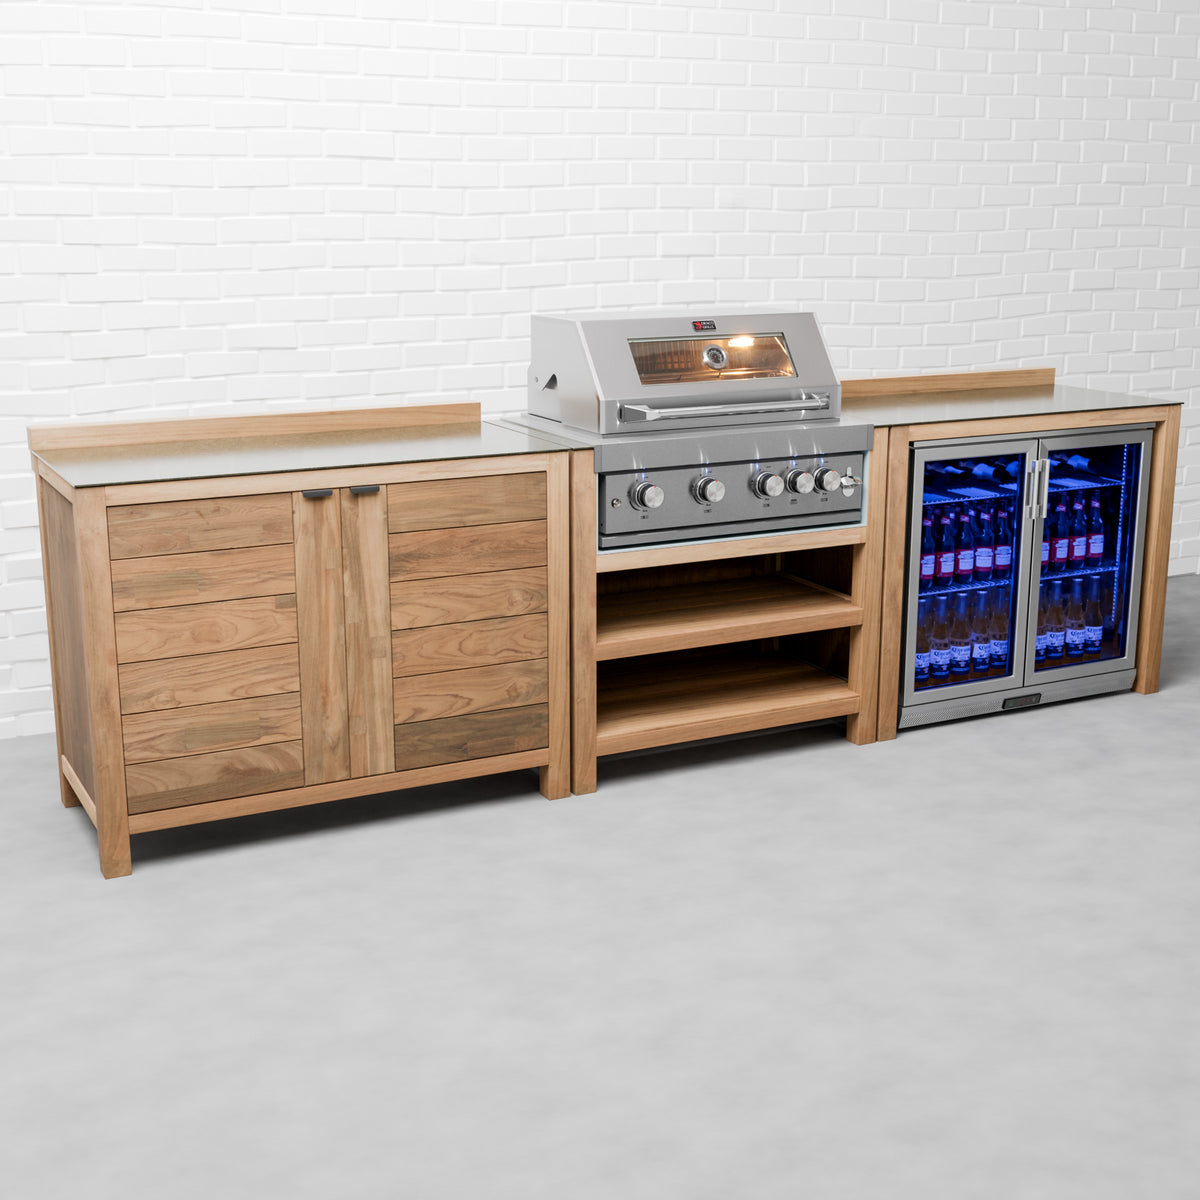 Draco Grills Teak 4 Burner Outdoor Kitchen with Modular Double Cupboard and Double Fridge